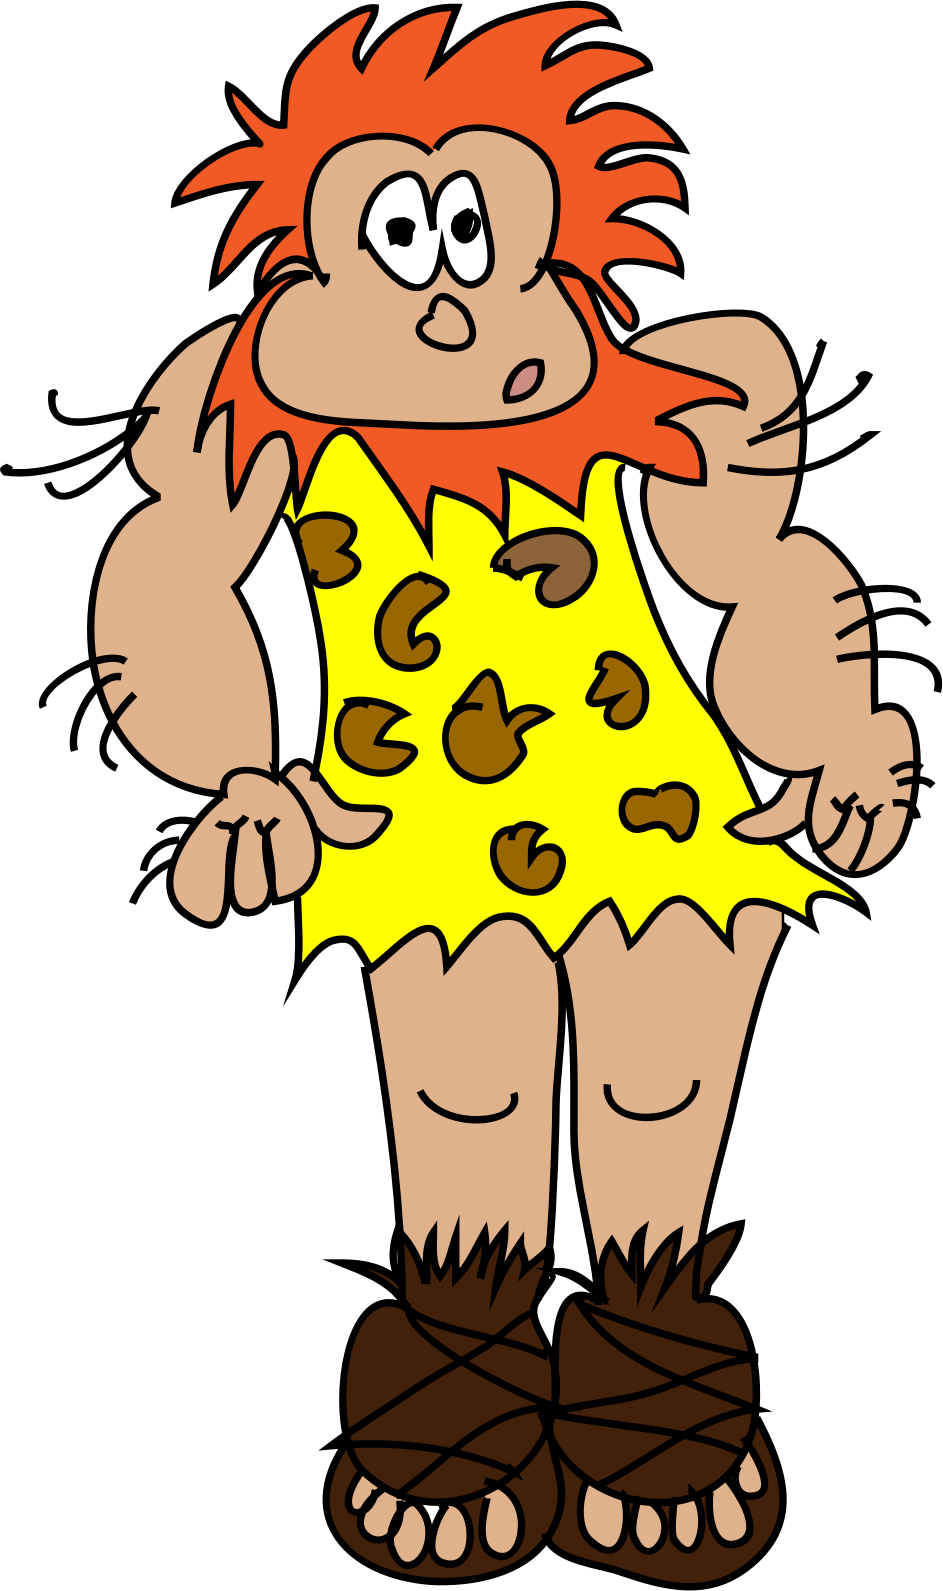 Free Baby Bootie Clipart Illustration Caveman Clipart - Free Baby Bootie Clipart Illustration Caveman Clipart (943x1591)